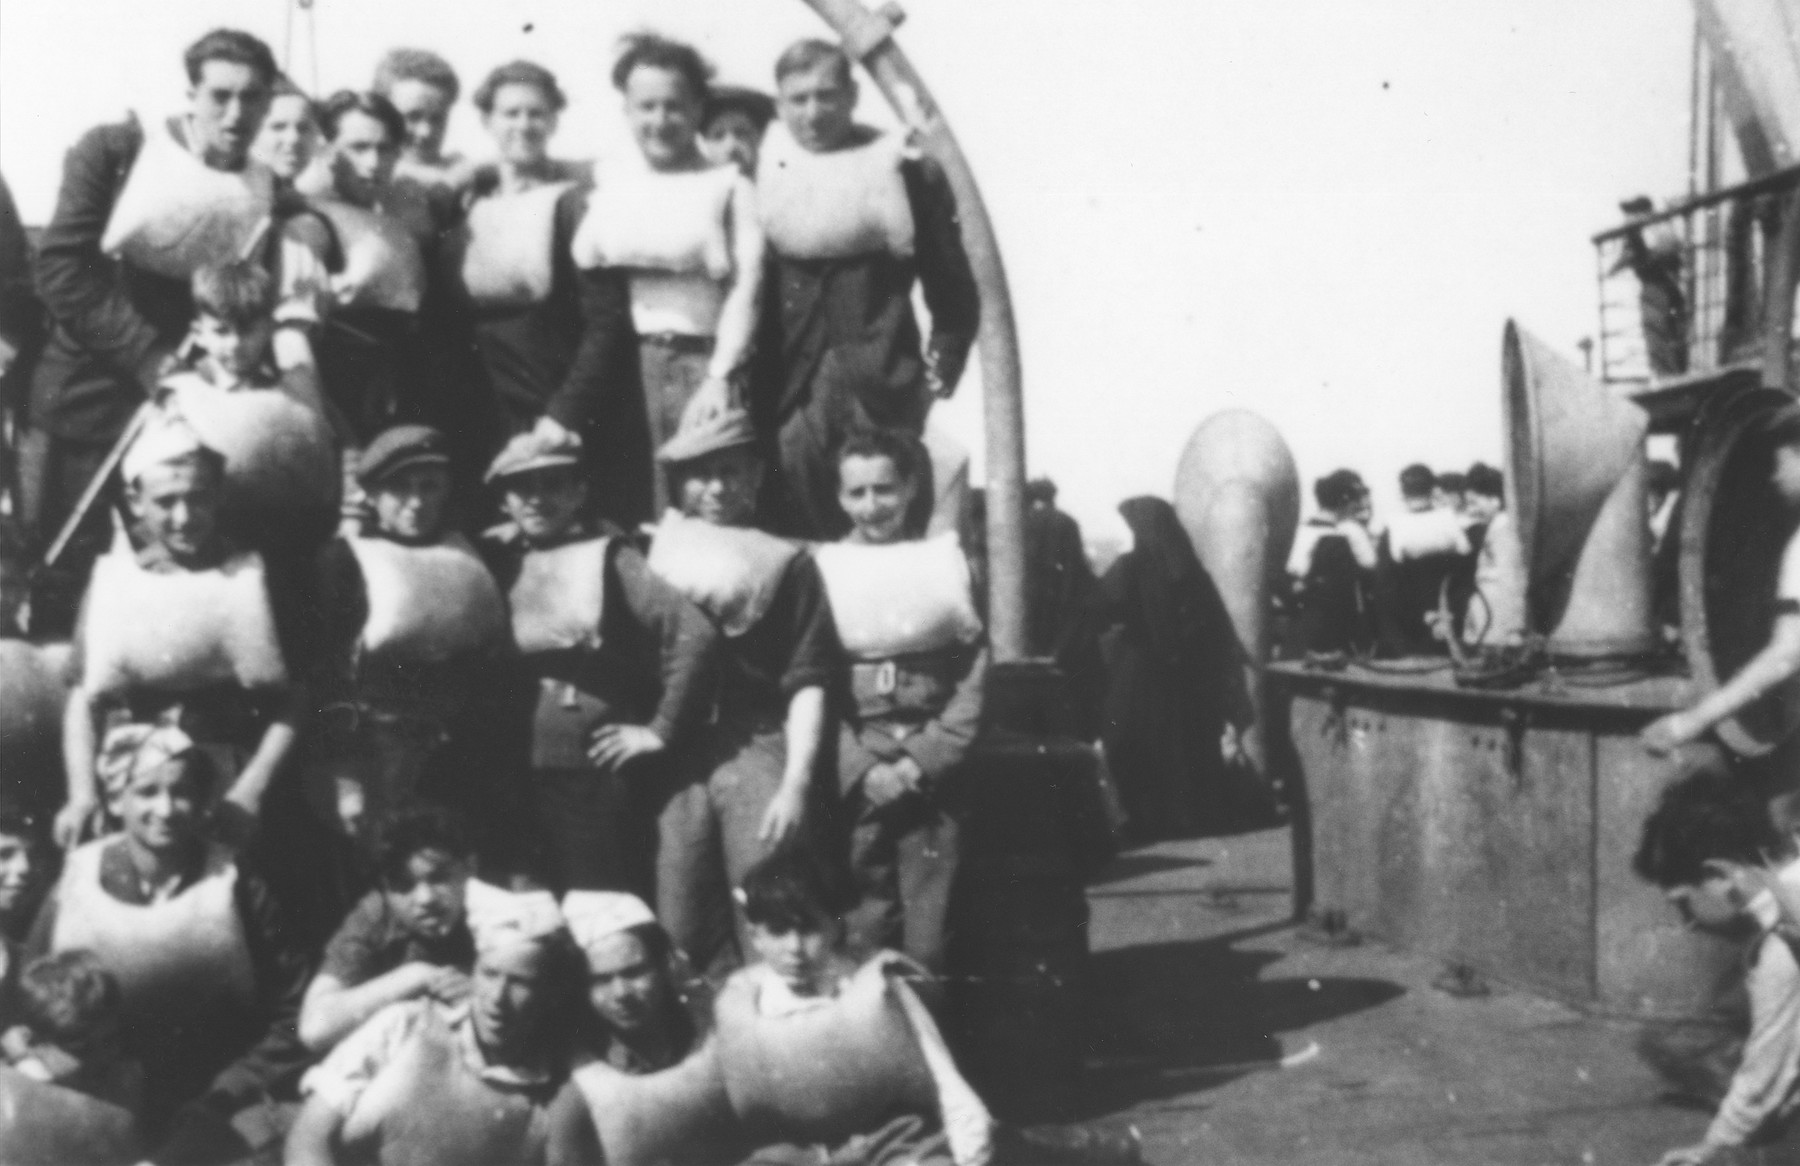 Group portrait of children wearing life jackets on board the SS Champollion during the voyage to Palestine.